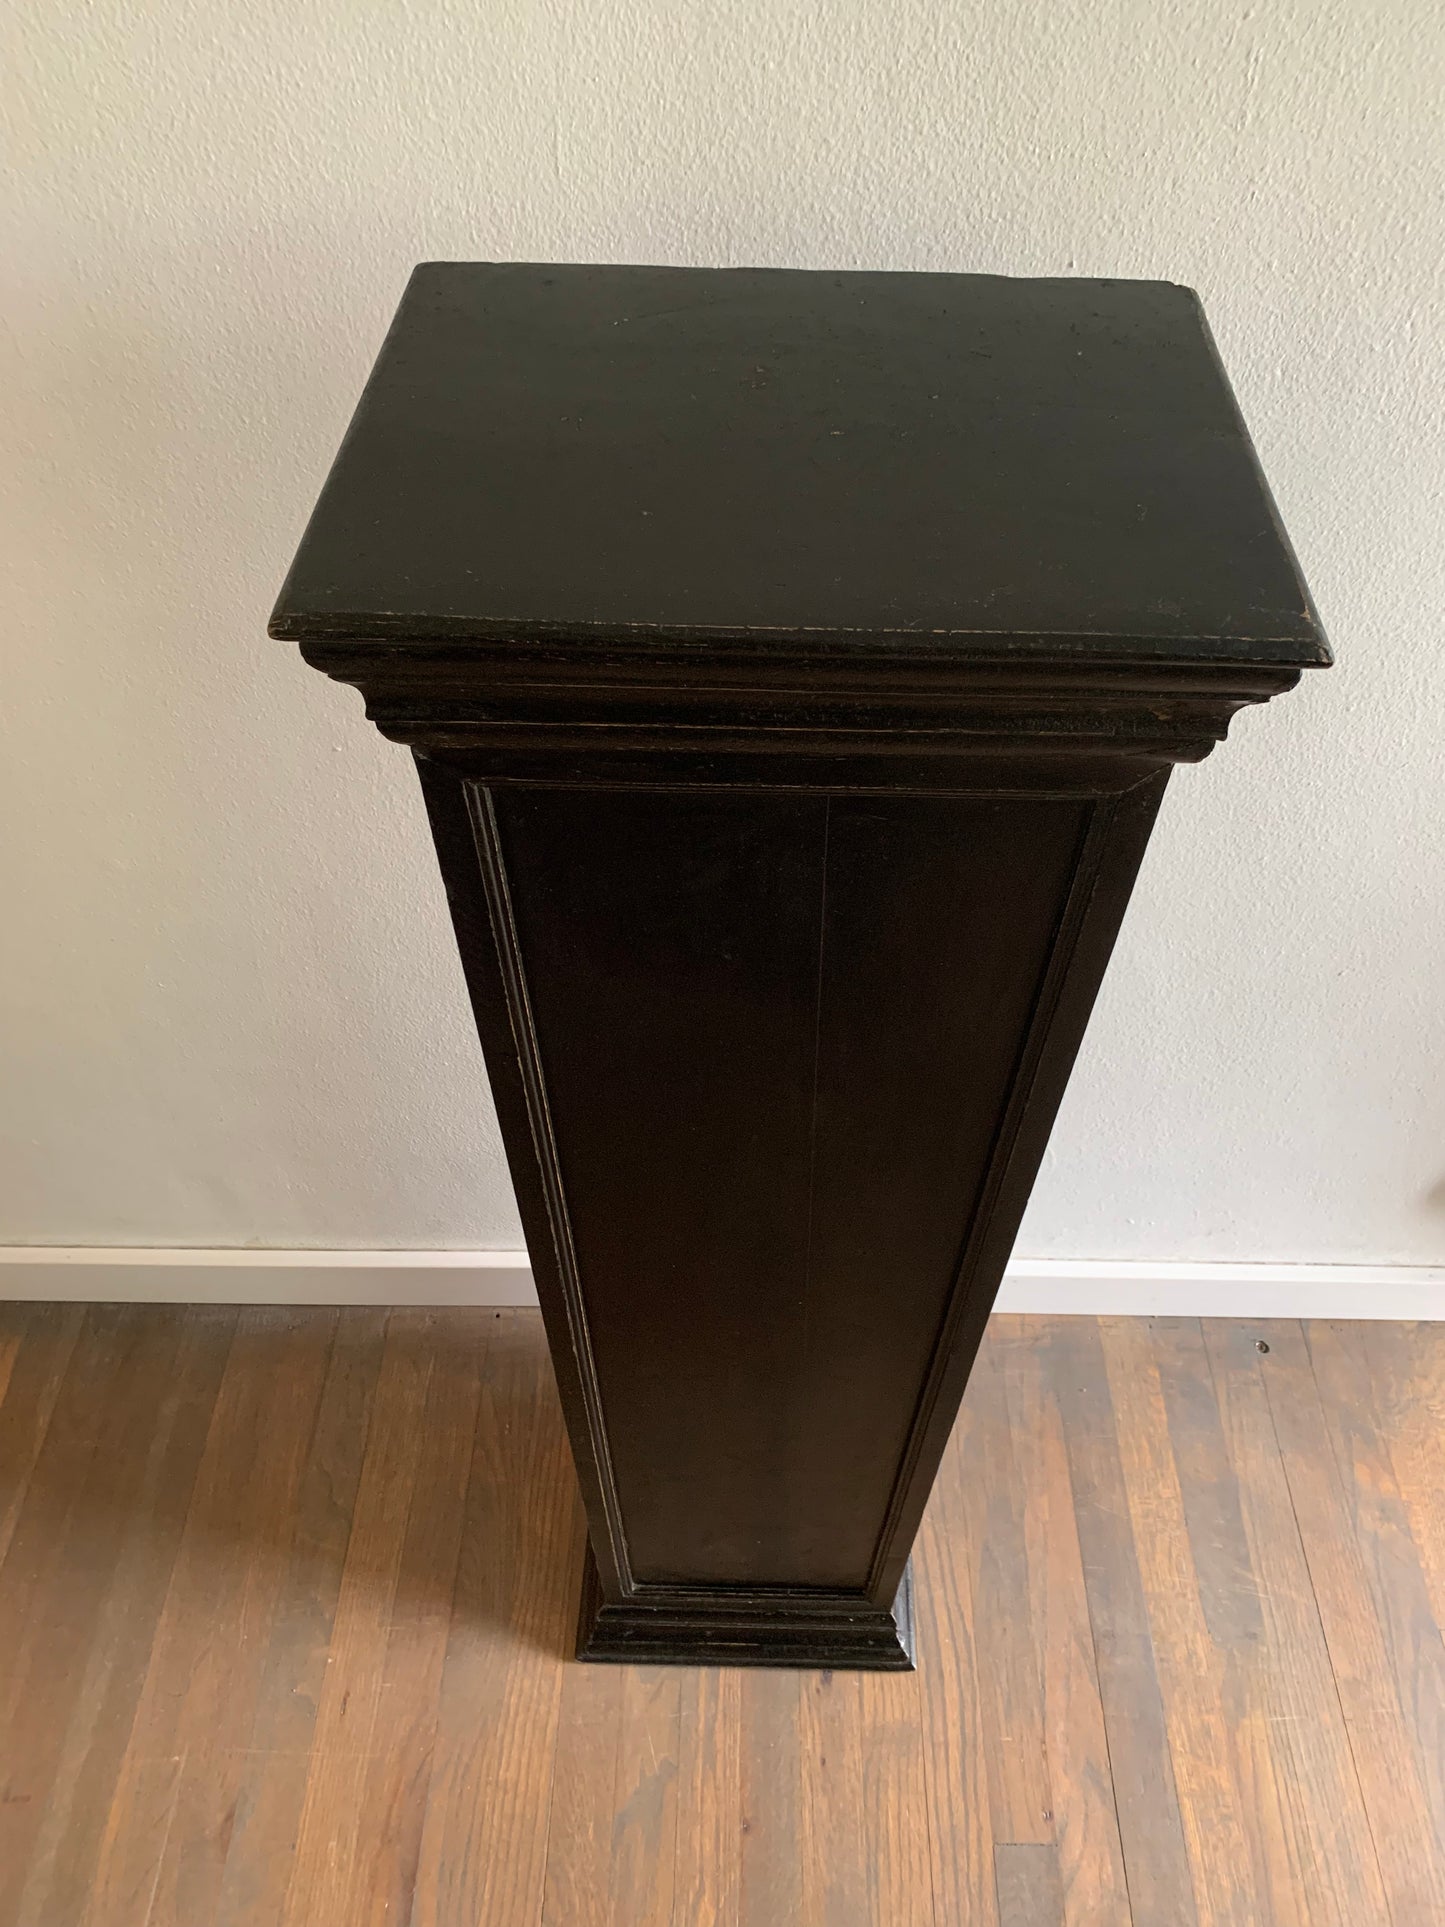 Early 21st Century Neoclassical Architectural Element Column Pedestal